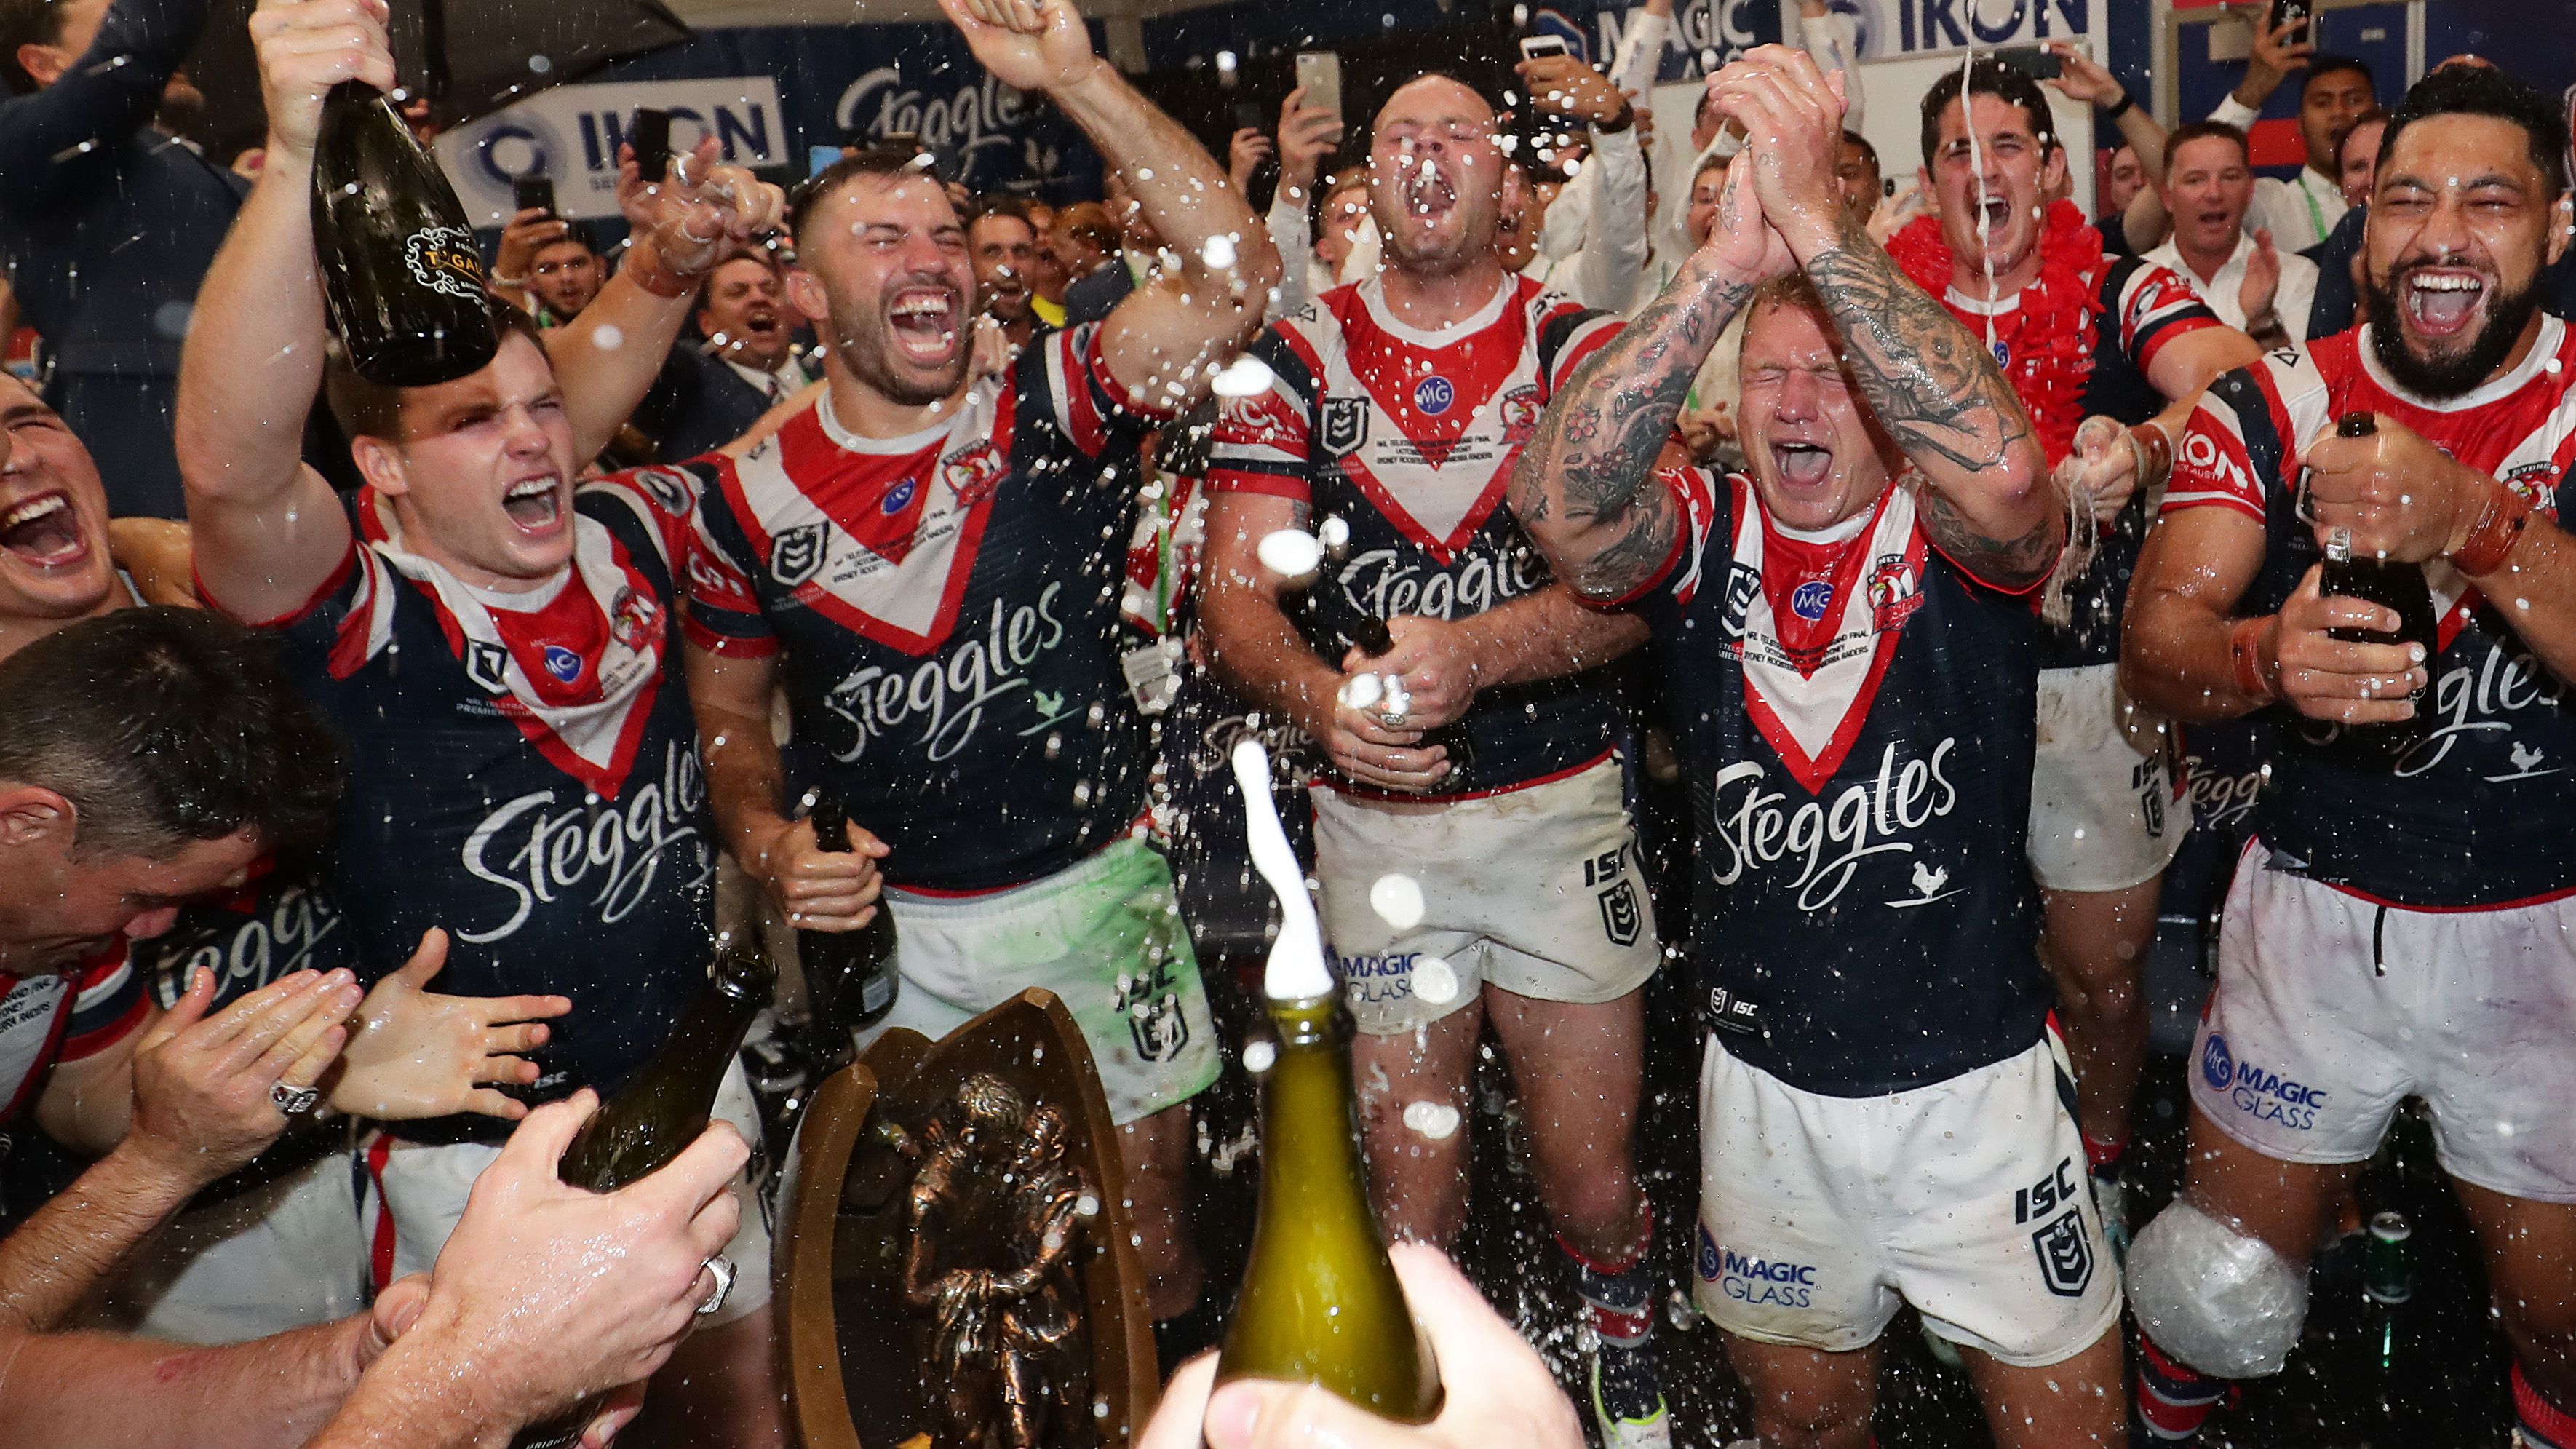 Sydney Roosters party all night after winning NRL Grand Final